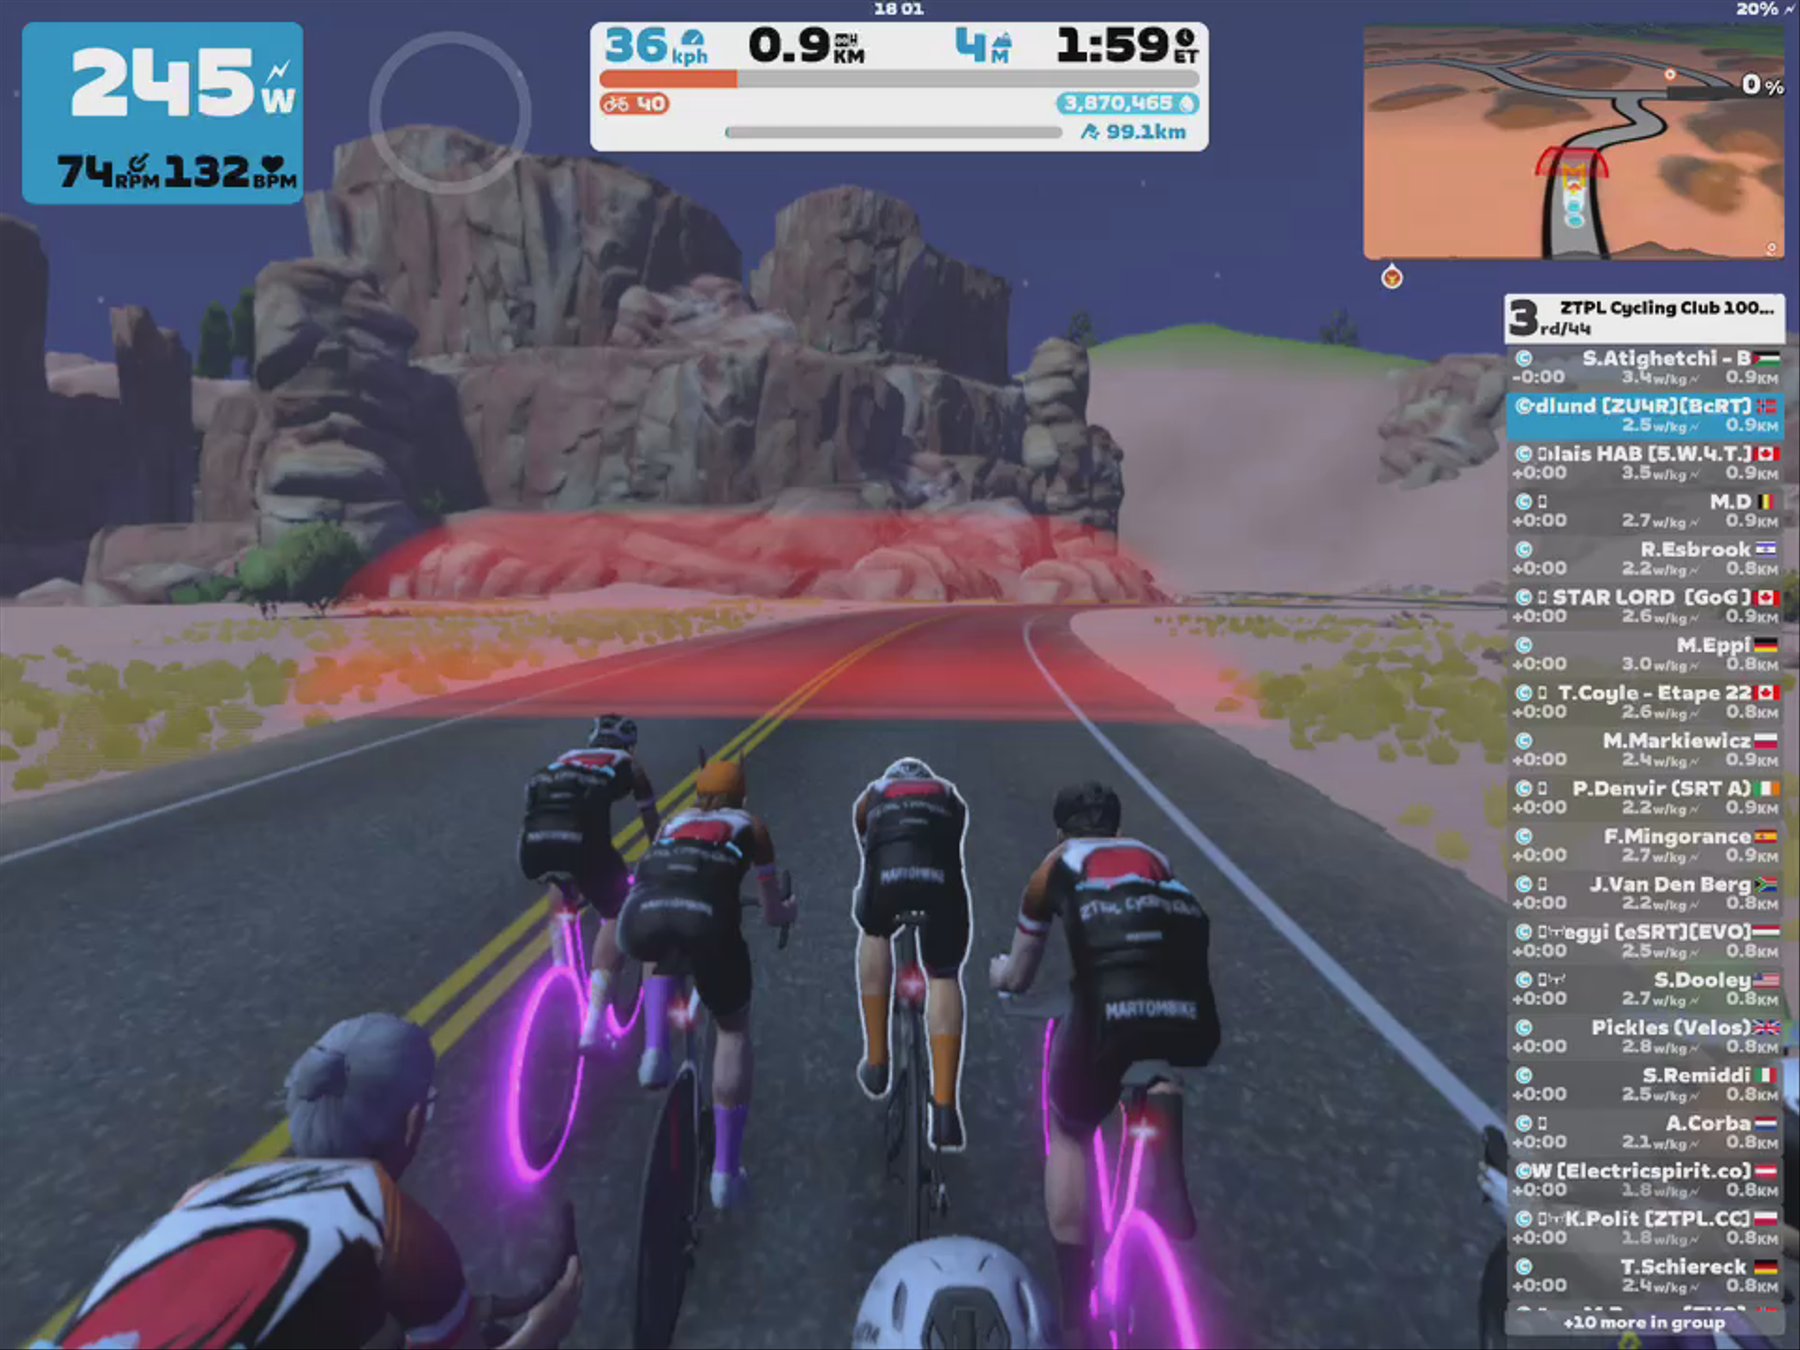 Zwift - Group Ride: ZTPL Cycling Club 100km ride (C) on Eastern Eight in Watopia